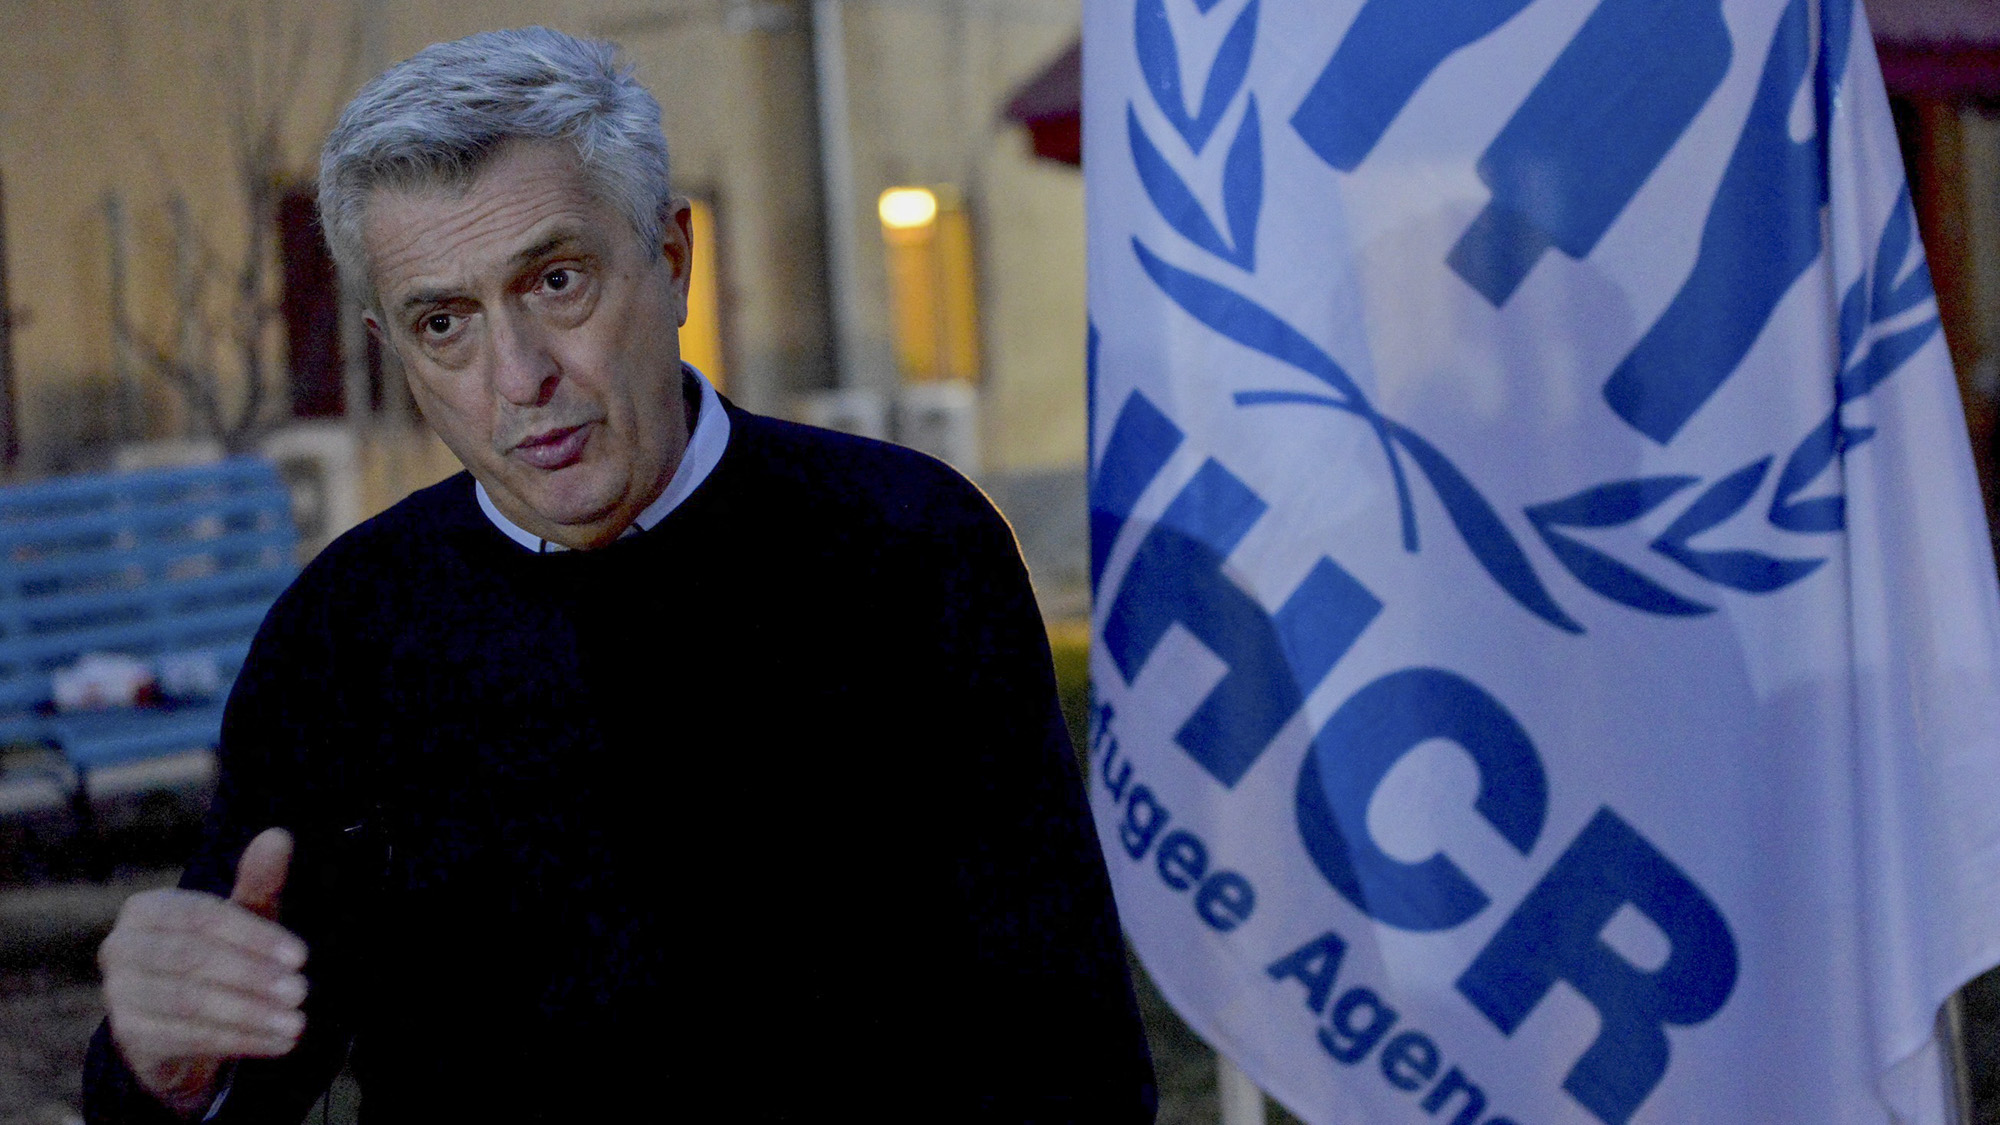 UN High Commissioner for Refugees Filippo Grandi is seen during a recent interview on March 15.